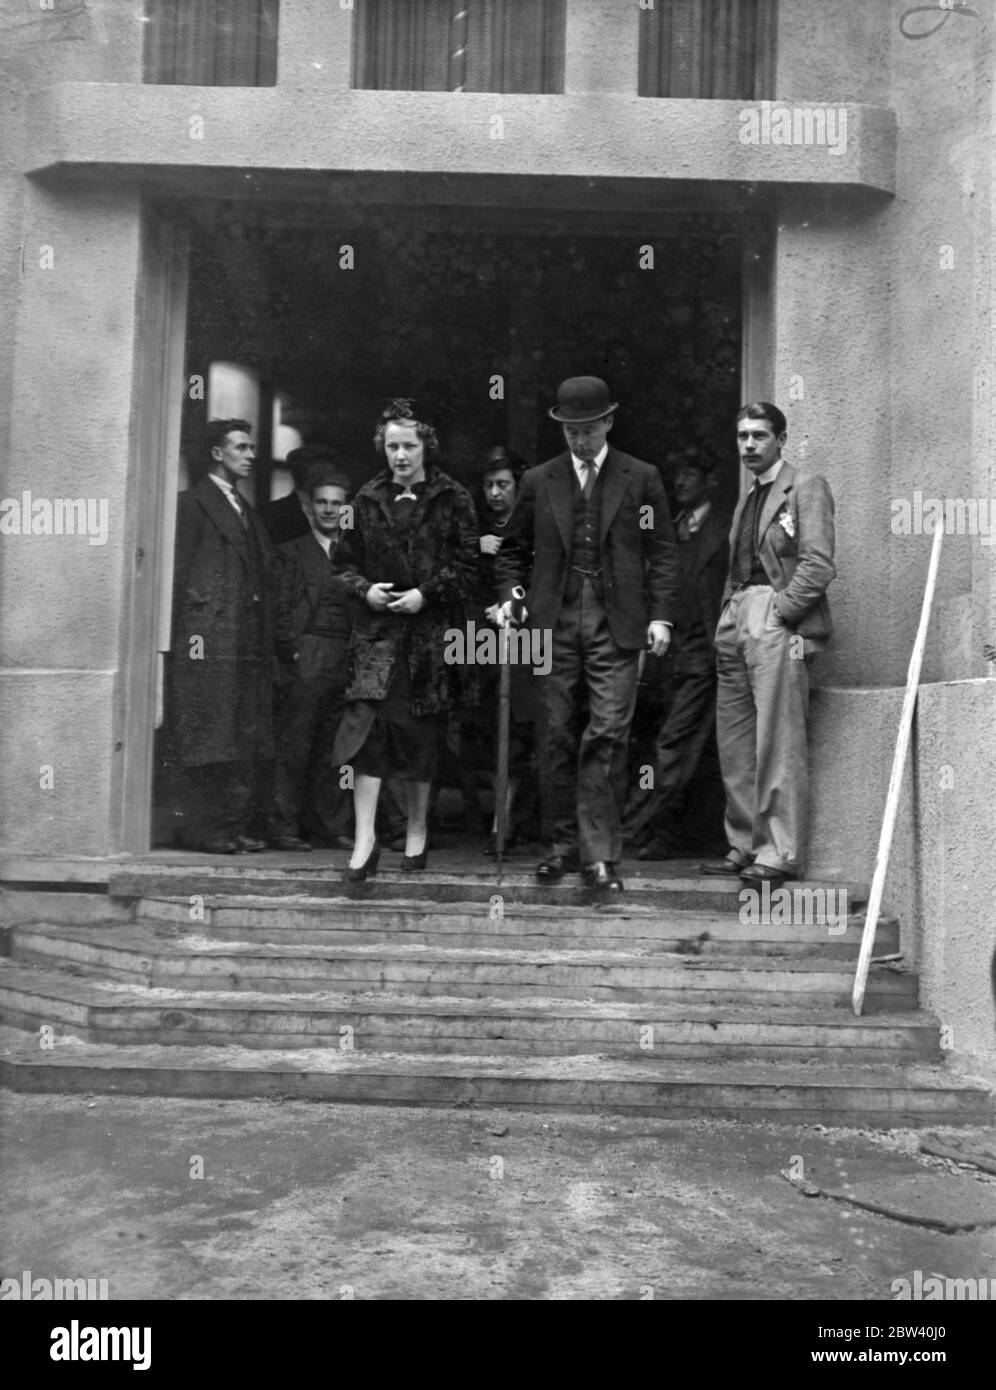 Duke and Duchess of Norfolk at Coronation rehearsal. The Duke of Norfolk, the Earl Marshall, and the Duchess were present at the Coronation rehearsal in Westminster Abbey. Photo shows: the Duke and Duchess of Norfolk leaving after rehearsal. 20 April 1937 Stock Photo